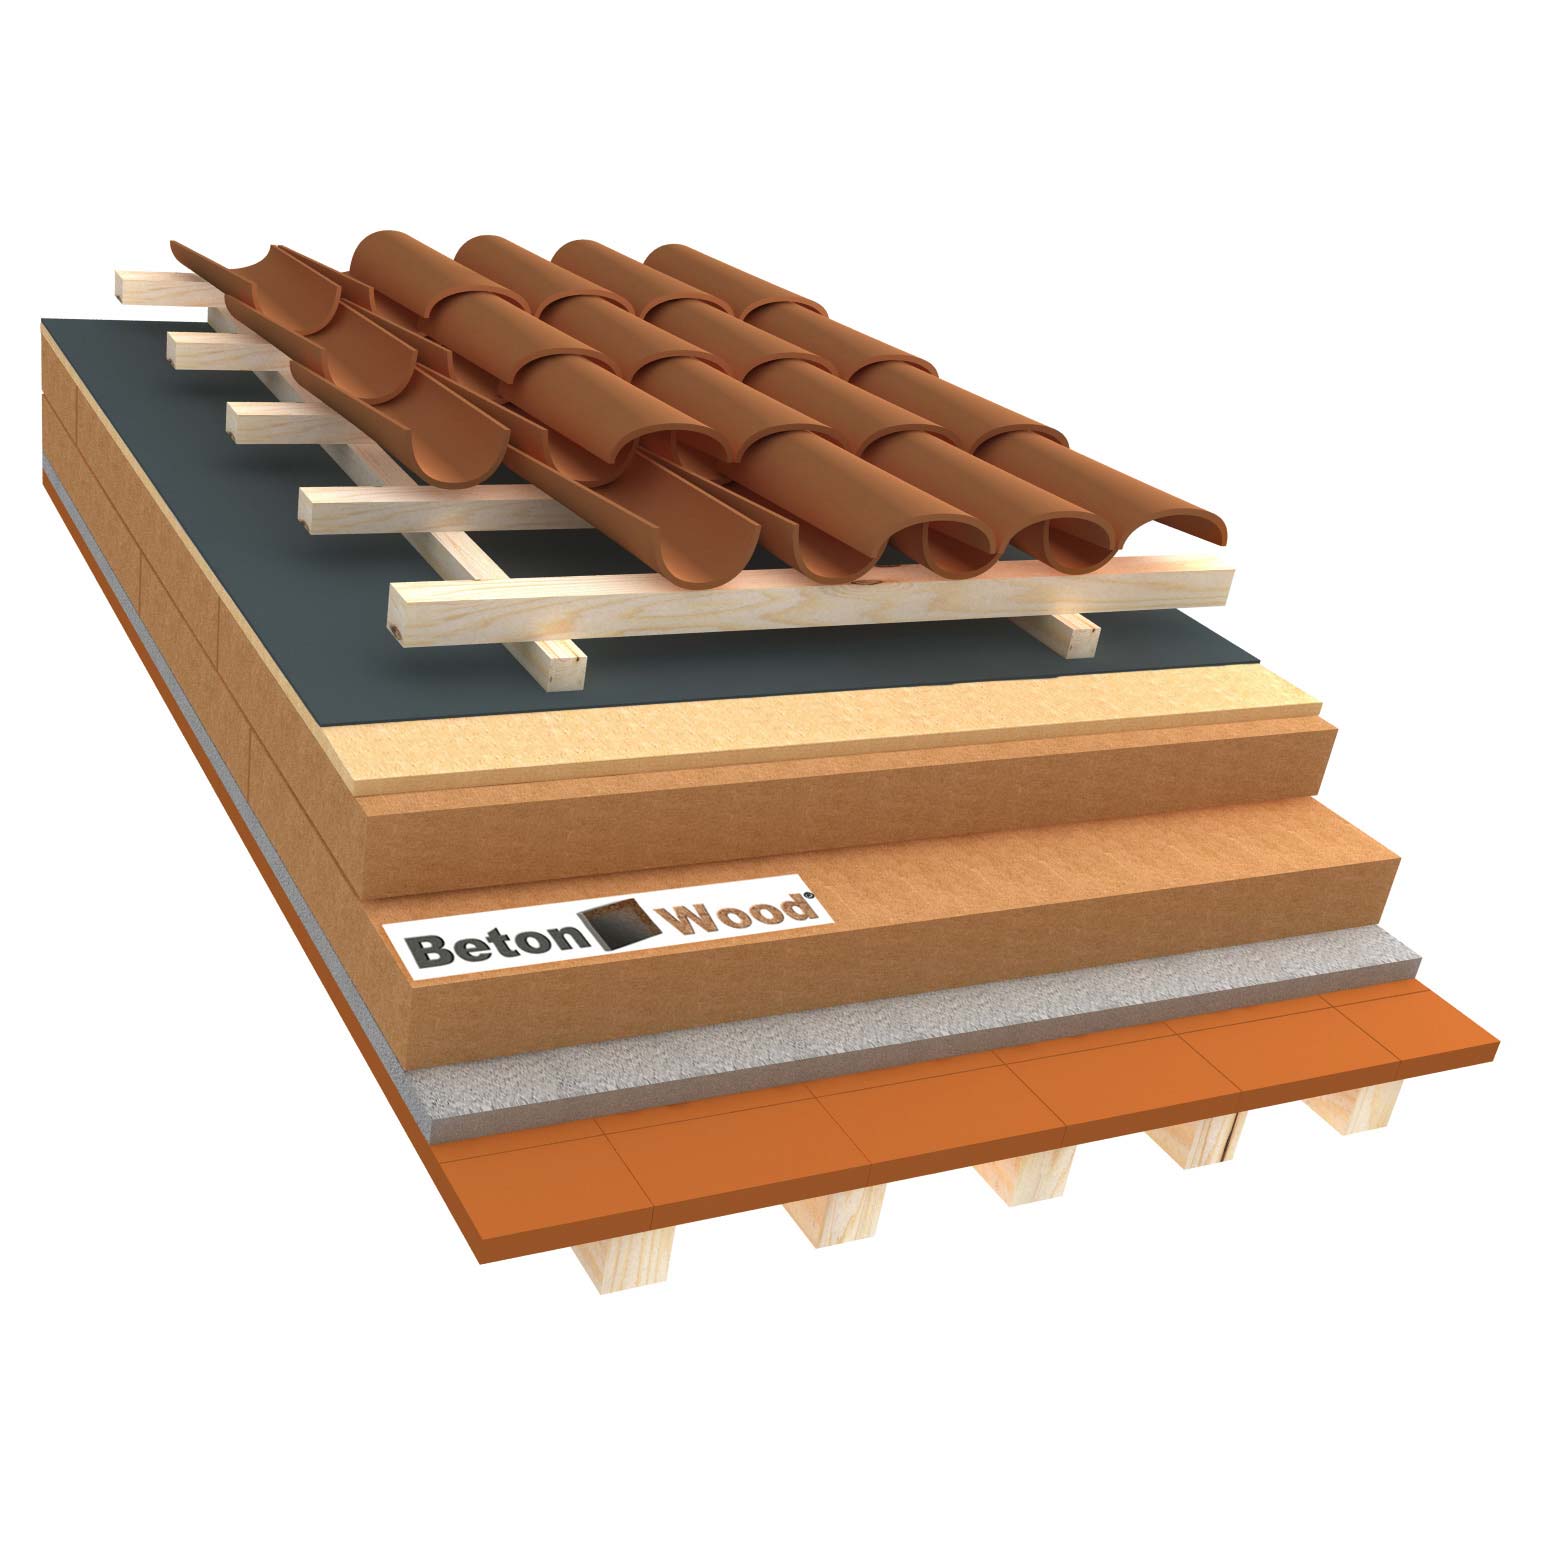 Ventilated roof with fiber wood Isorel and Special on terracotta tiles